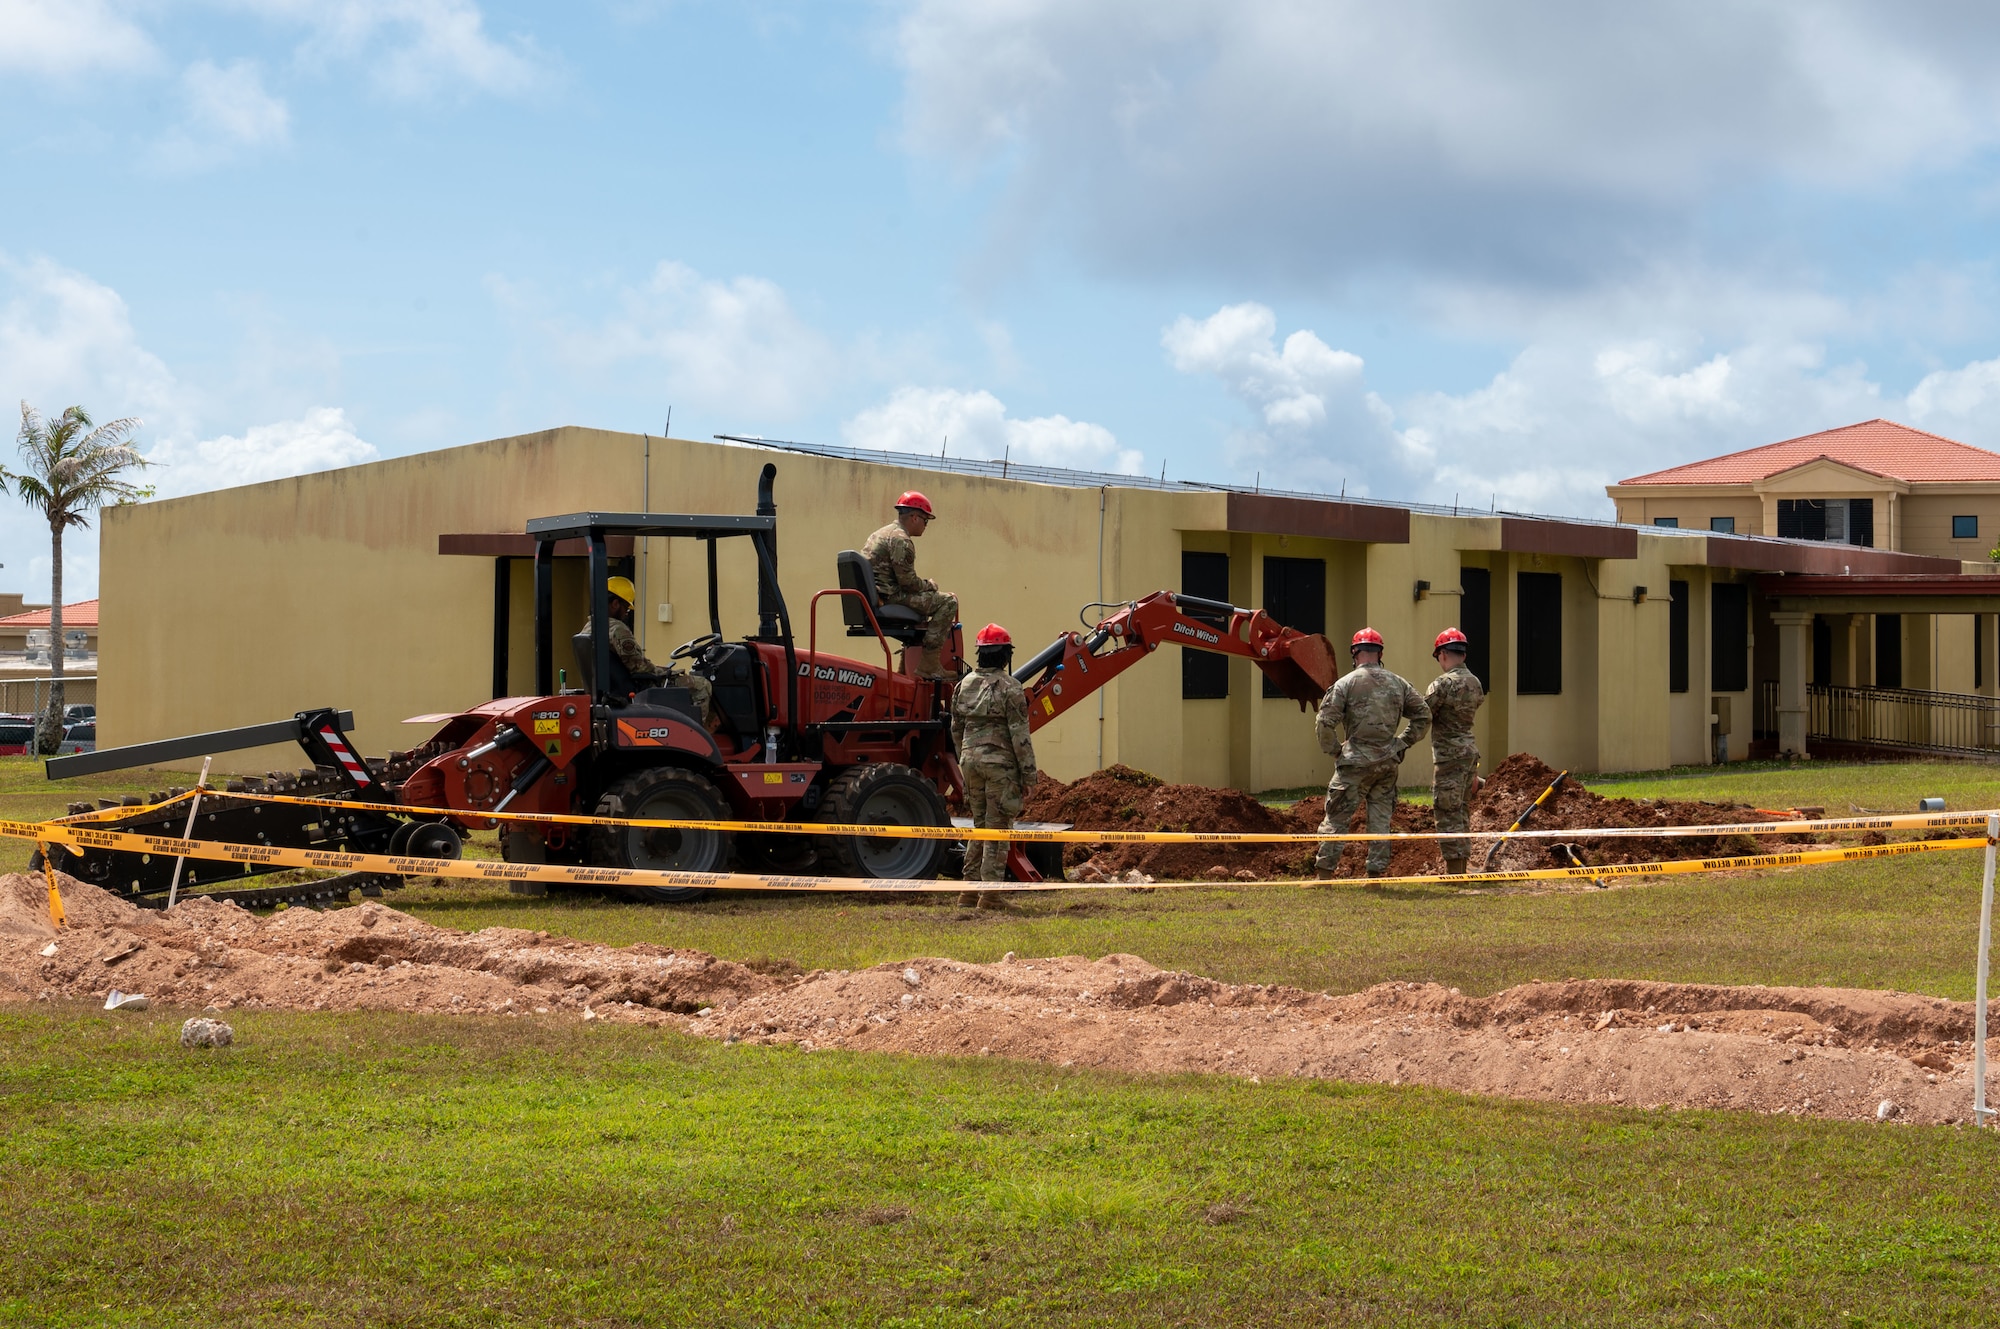 Multiple Air Force Specialty Codes work together to support the 36th Force Support Squadron’s initiative to repair the CDC of damages caused by Typhoon Mawar. (U.S. Air Force photo by Airman 1st Class Audree Campbell)